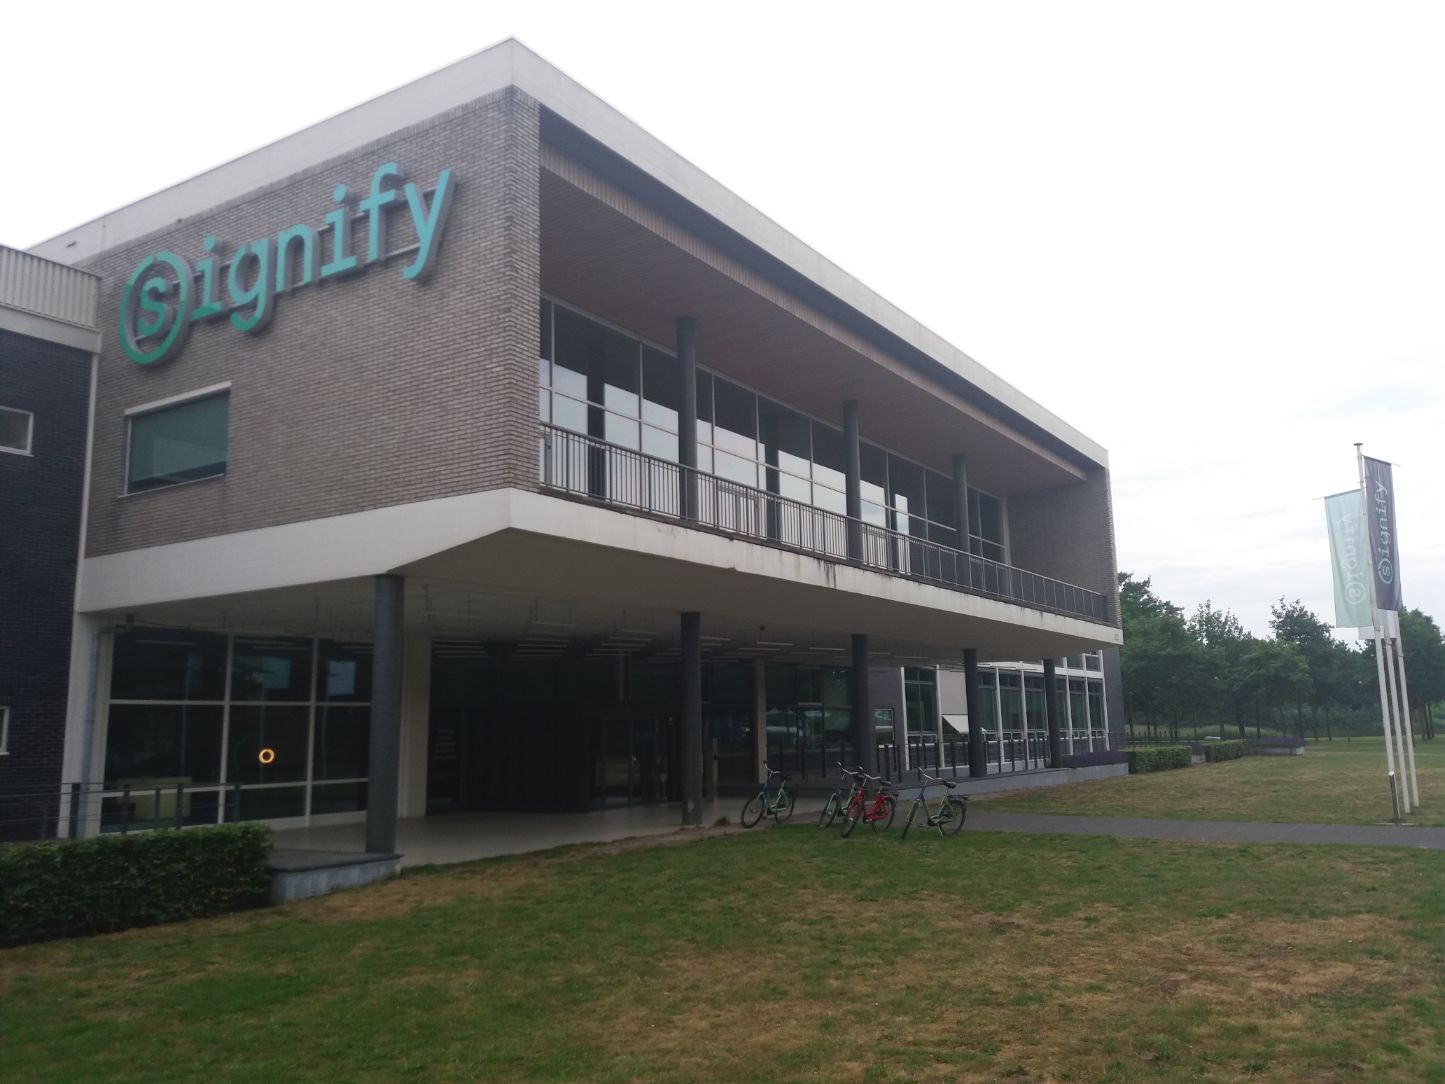 Signify-High Tech Campus Eindhoven